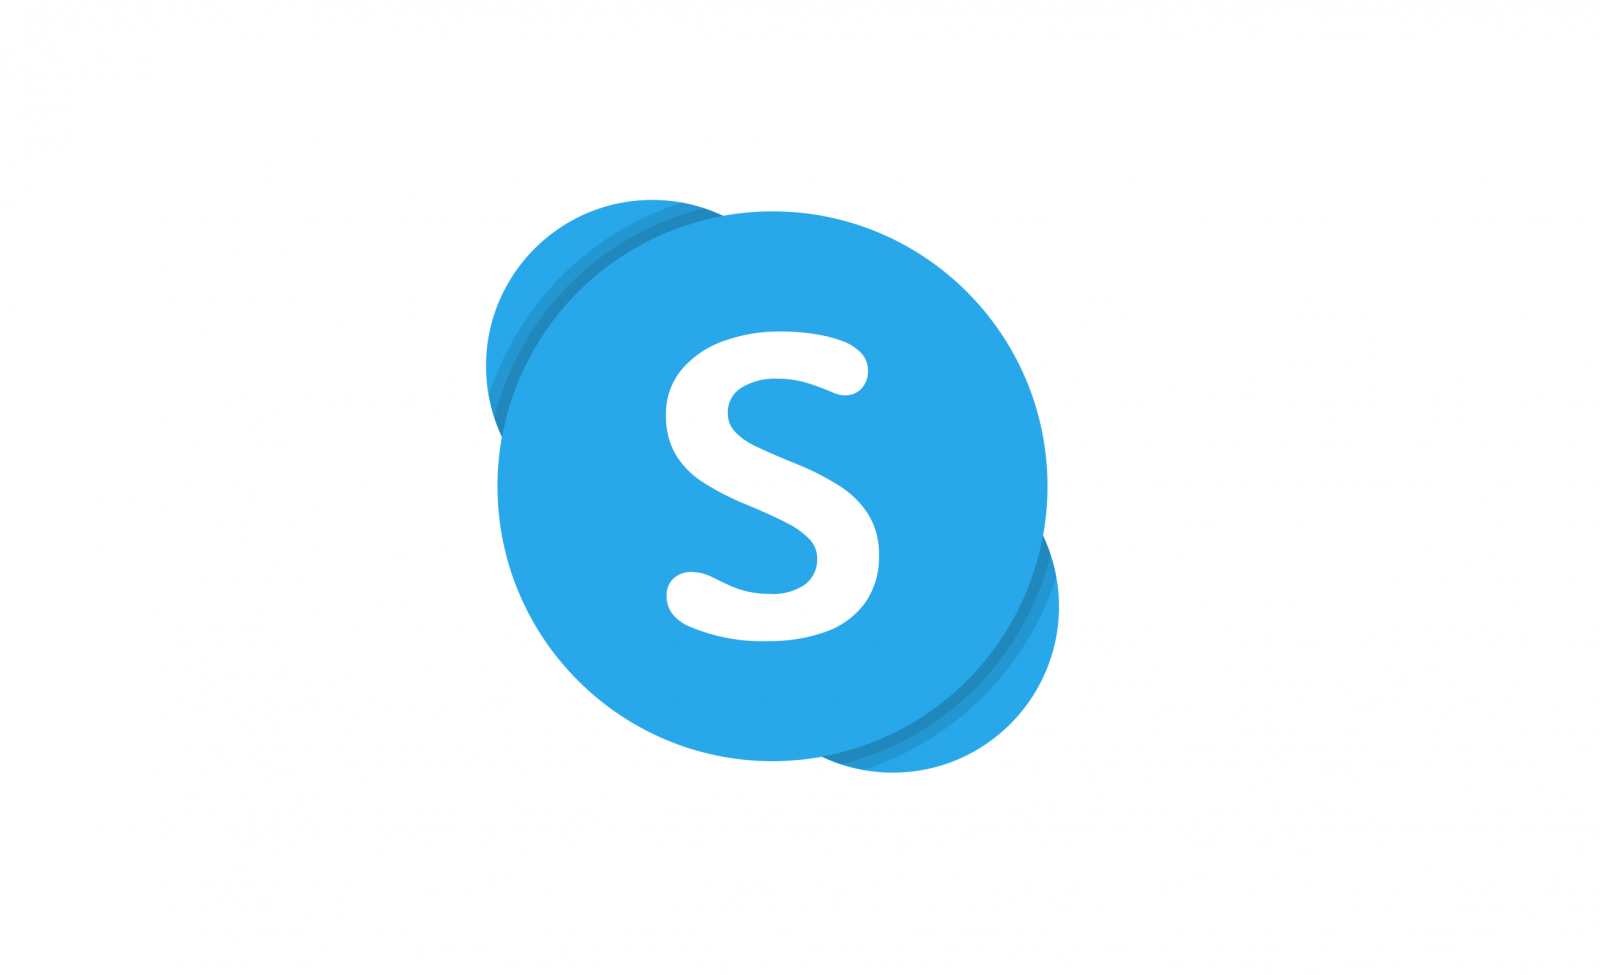 how to find your skype name on phone